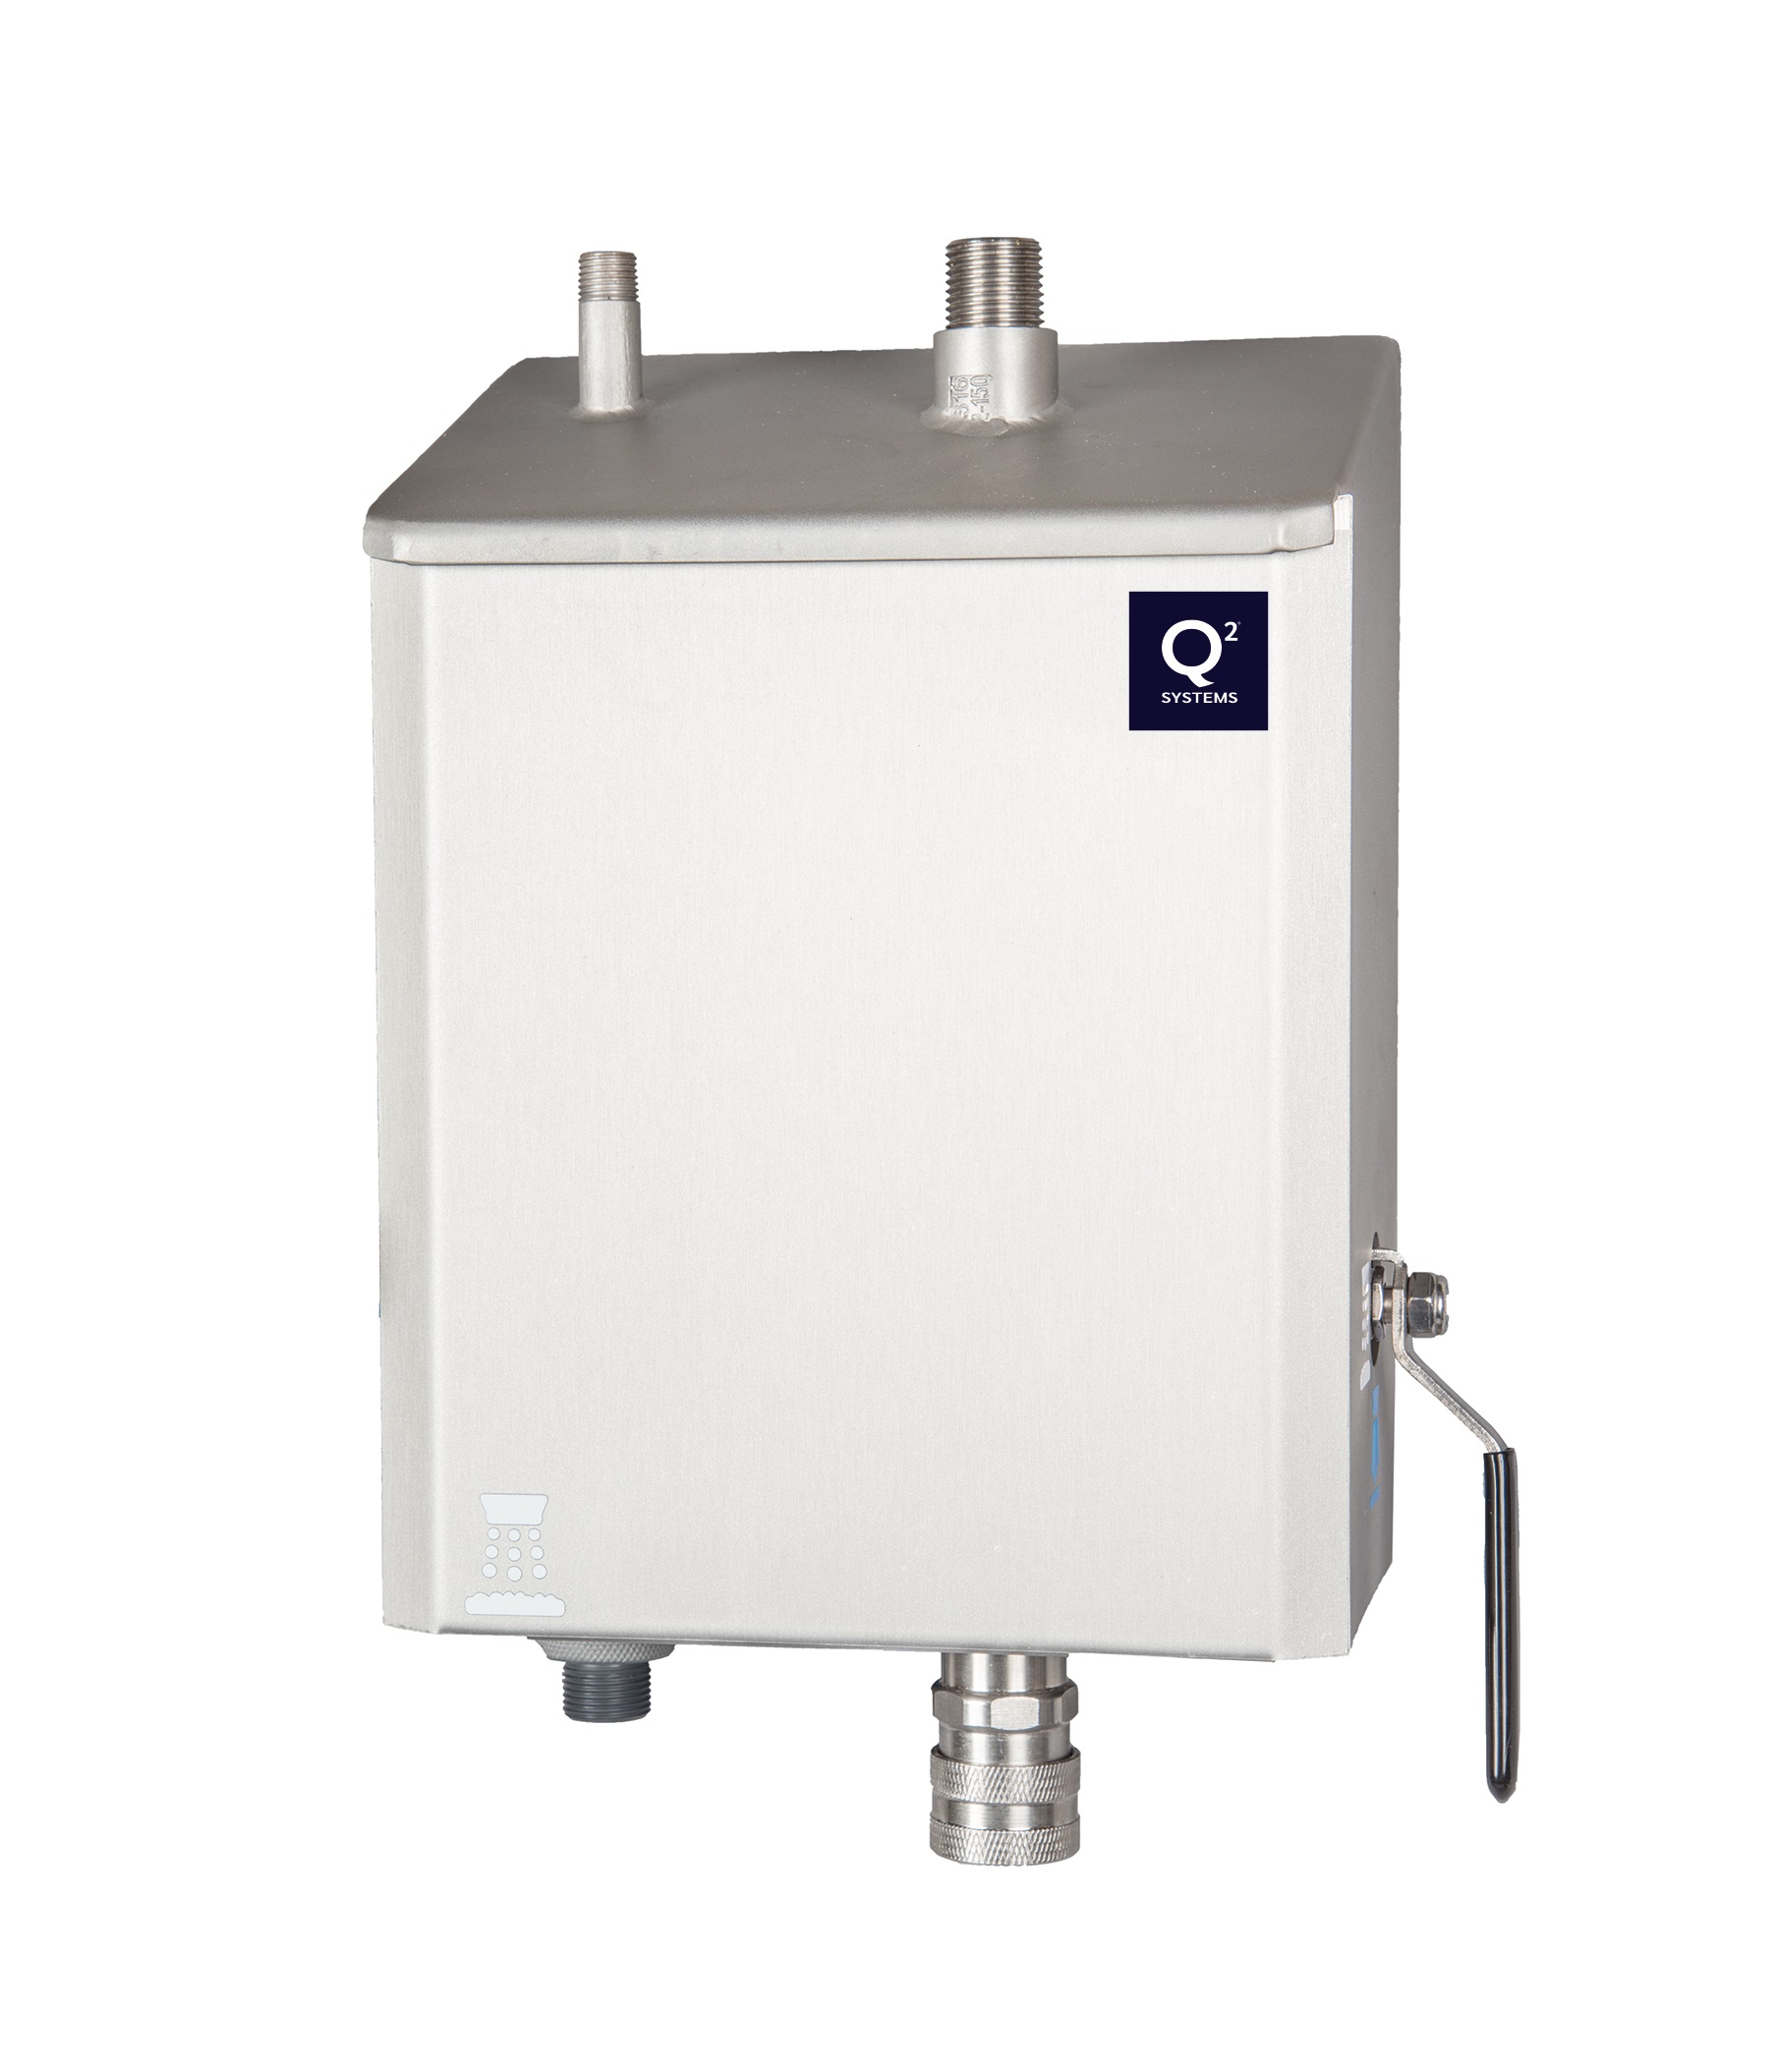 Supporting image for P-Q2 ChemPoint Series 3 HD Foam and Rinse Satellite Station 3-10 Bar